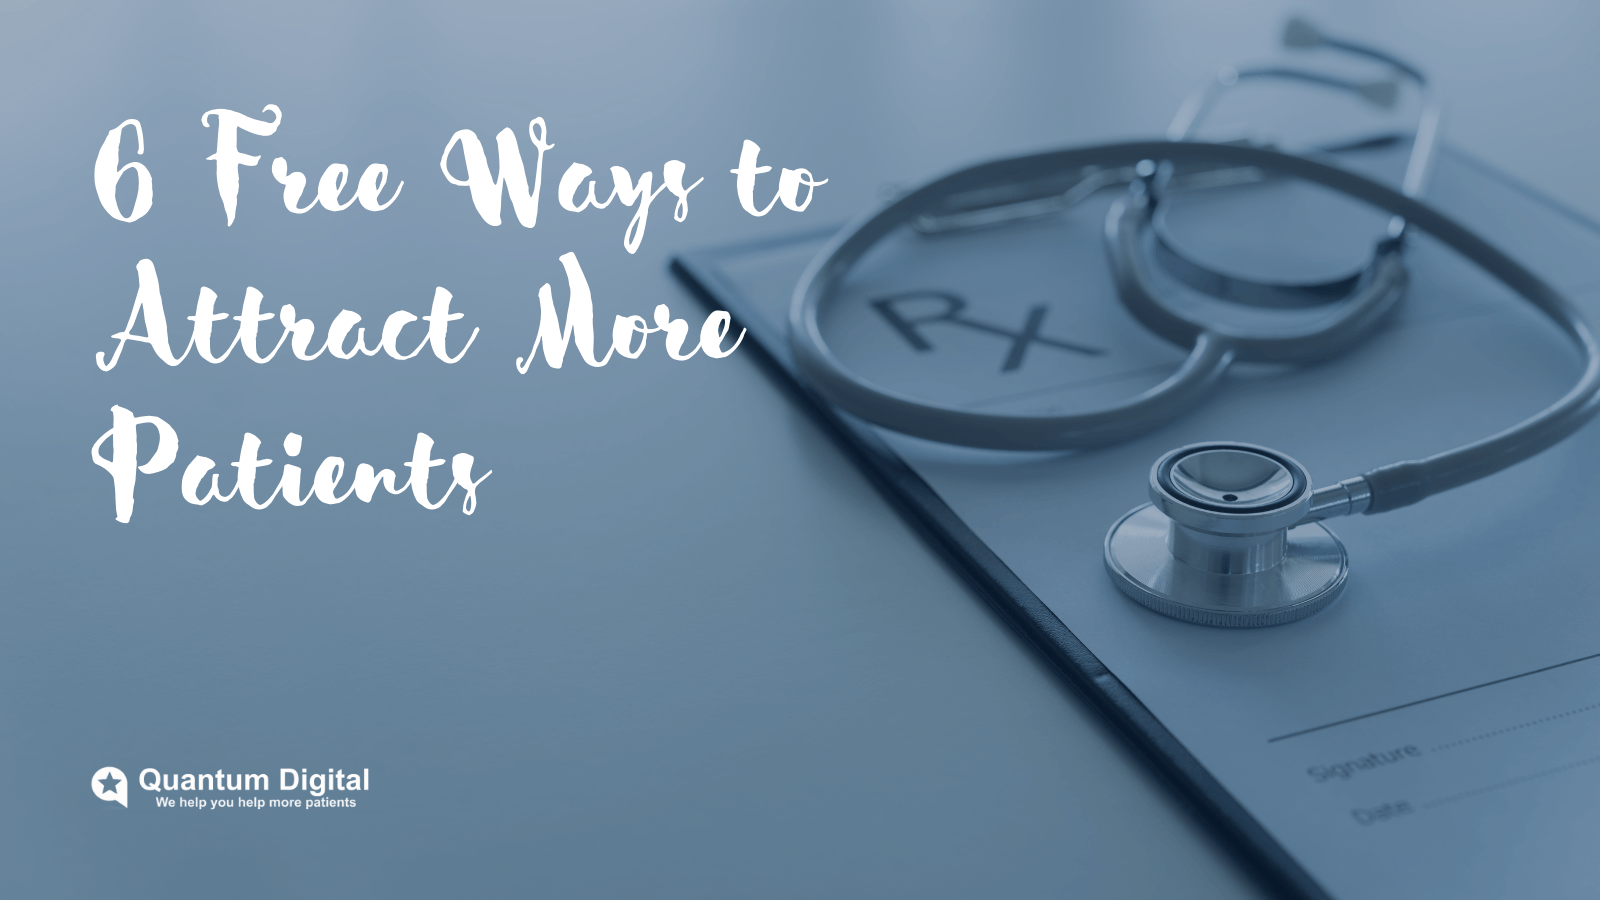 6 Free Ways to Attract More Patients - Medical Marketing for Doctors, Surgeons & Dentists